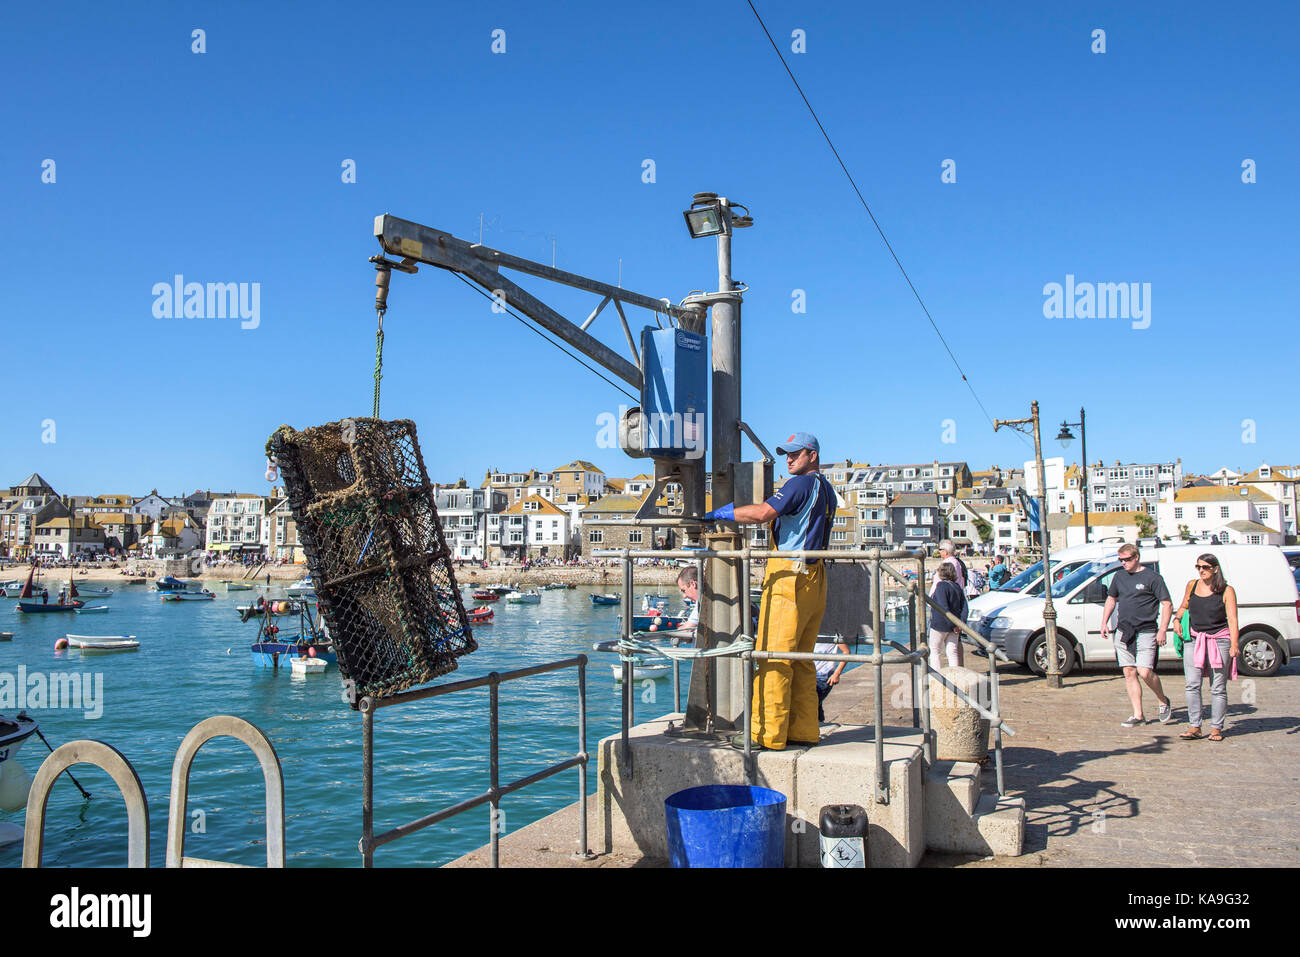 St Ives fishing industry - a fisherman using a hoist to unload crab lobster pots on Smeatons Pier in St Ives in Cornwall. Stock Photo